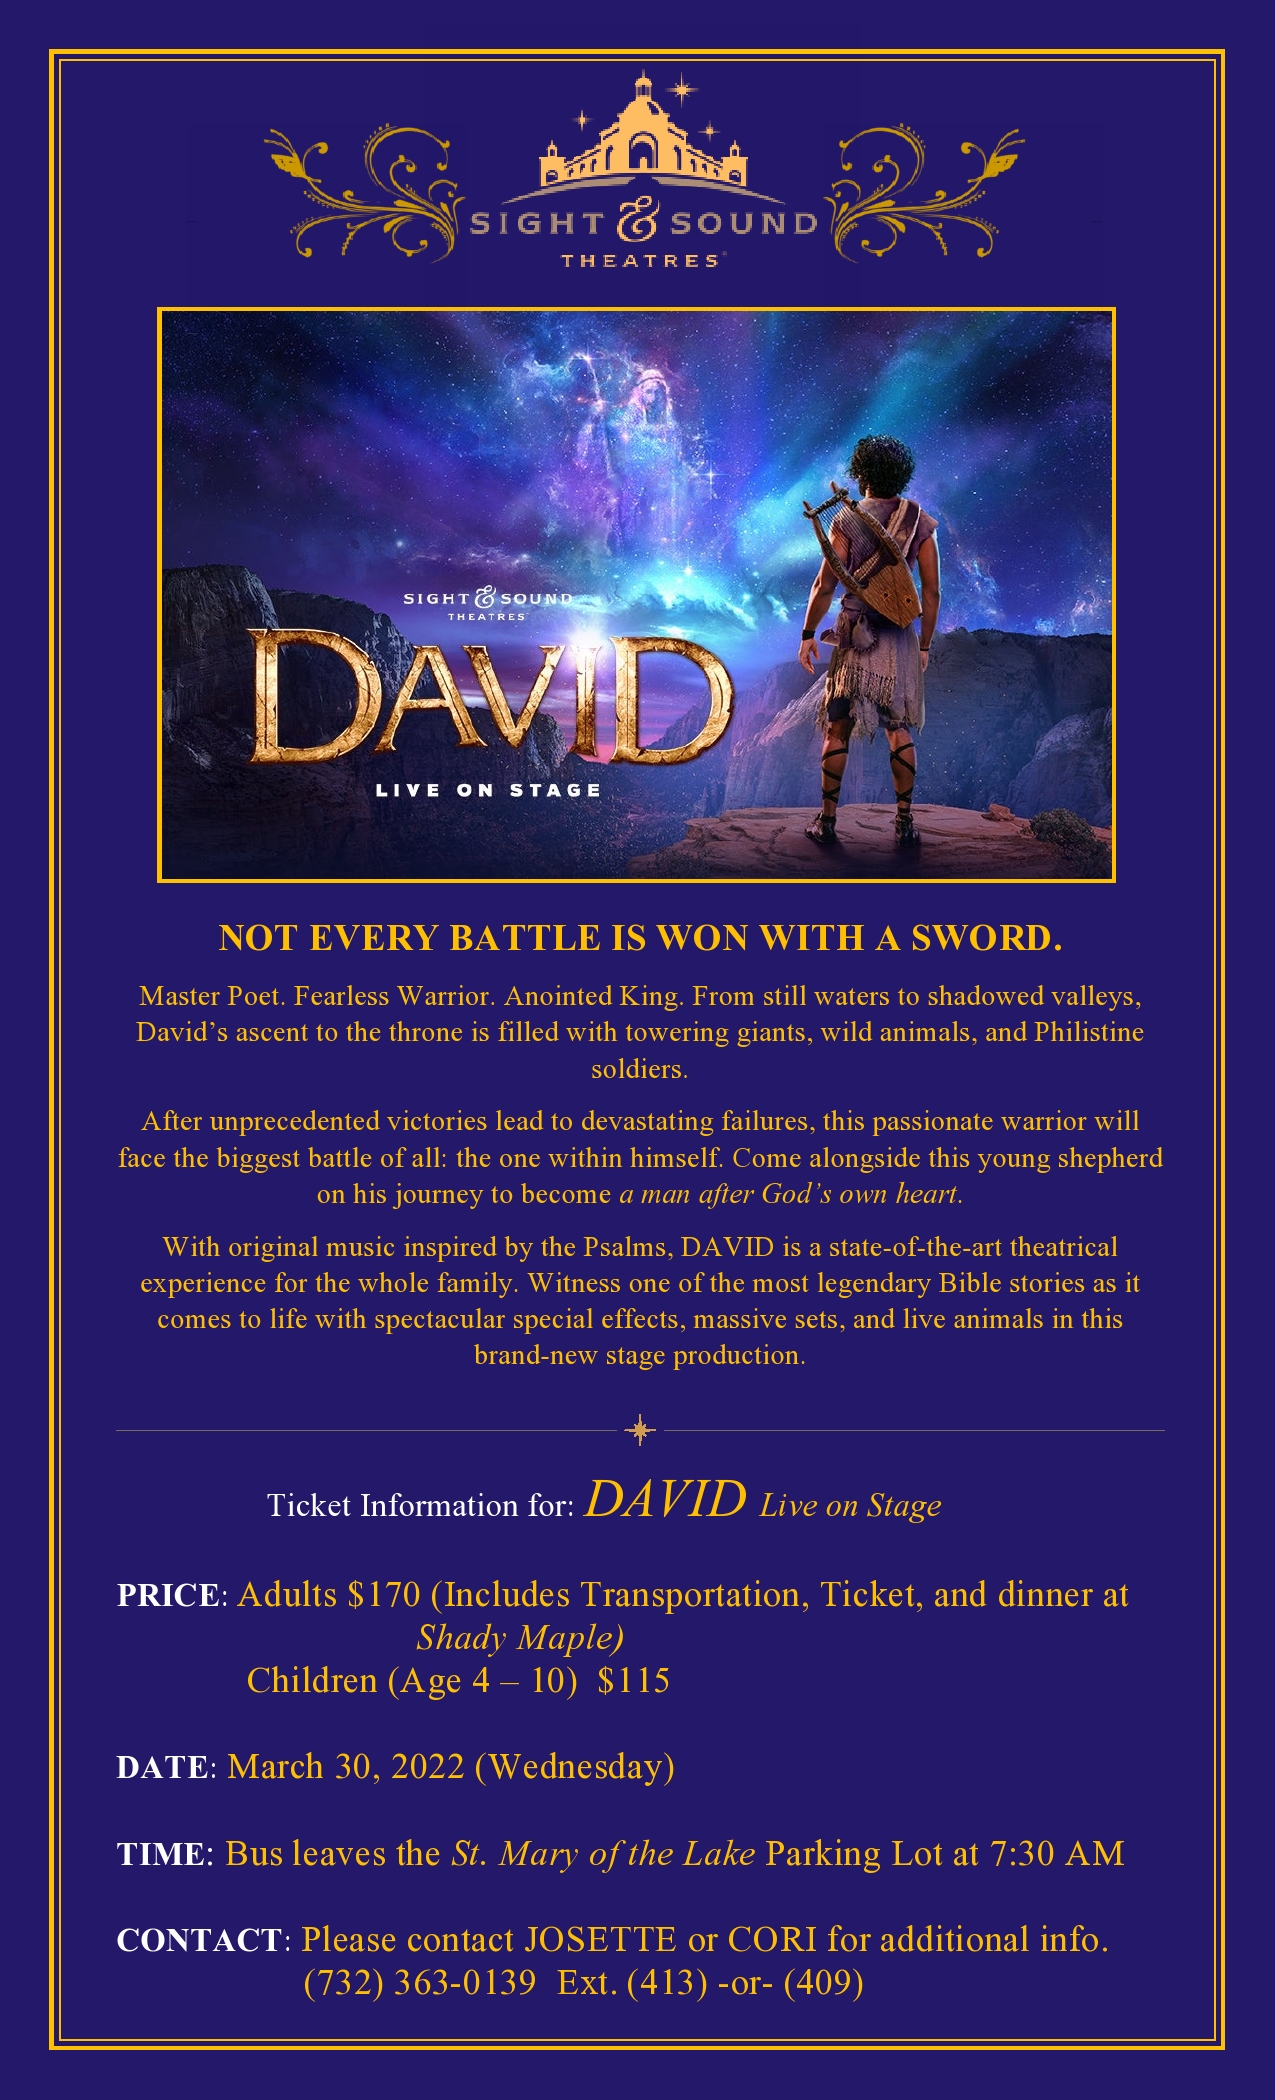 DAVID ss theater flyer ENG with contact